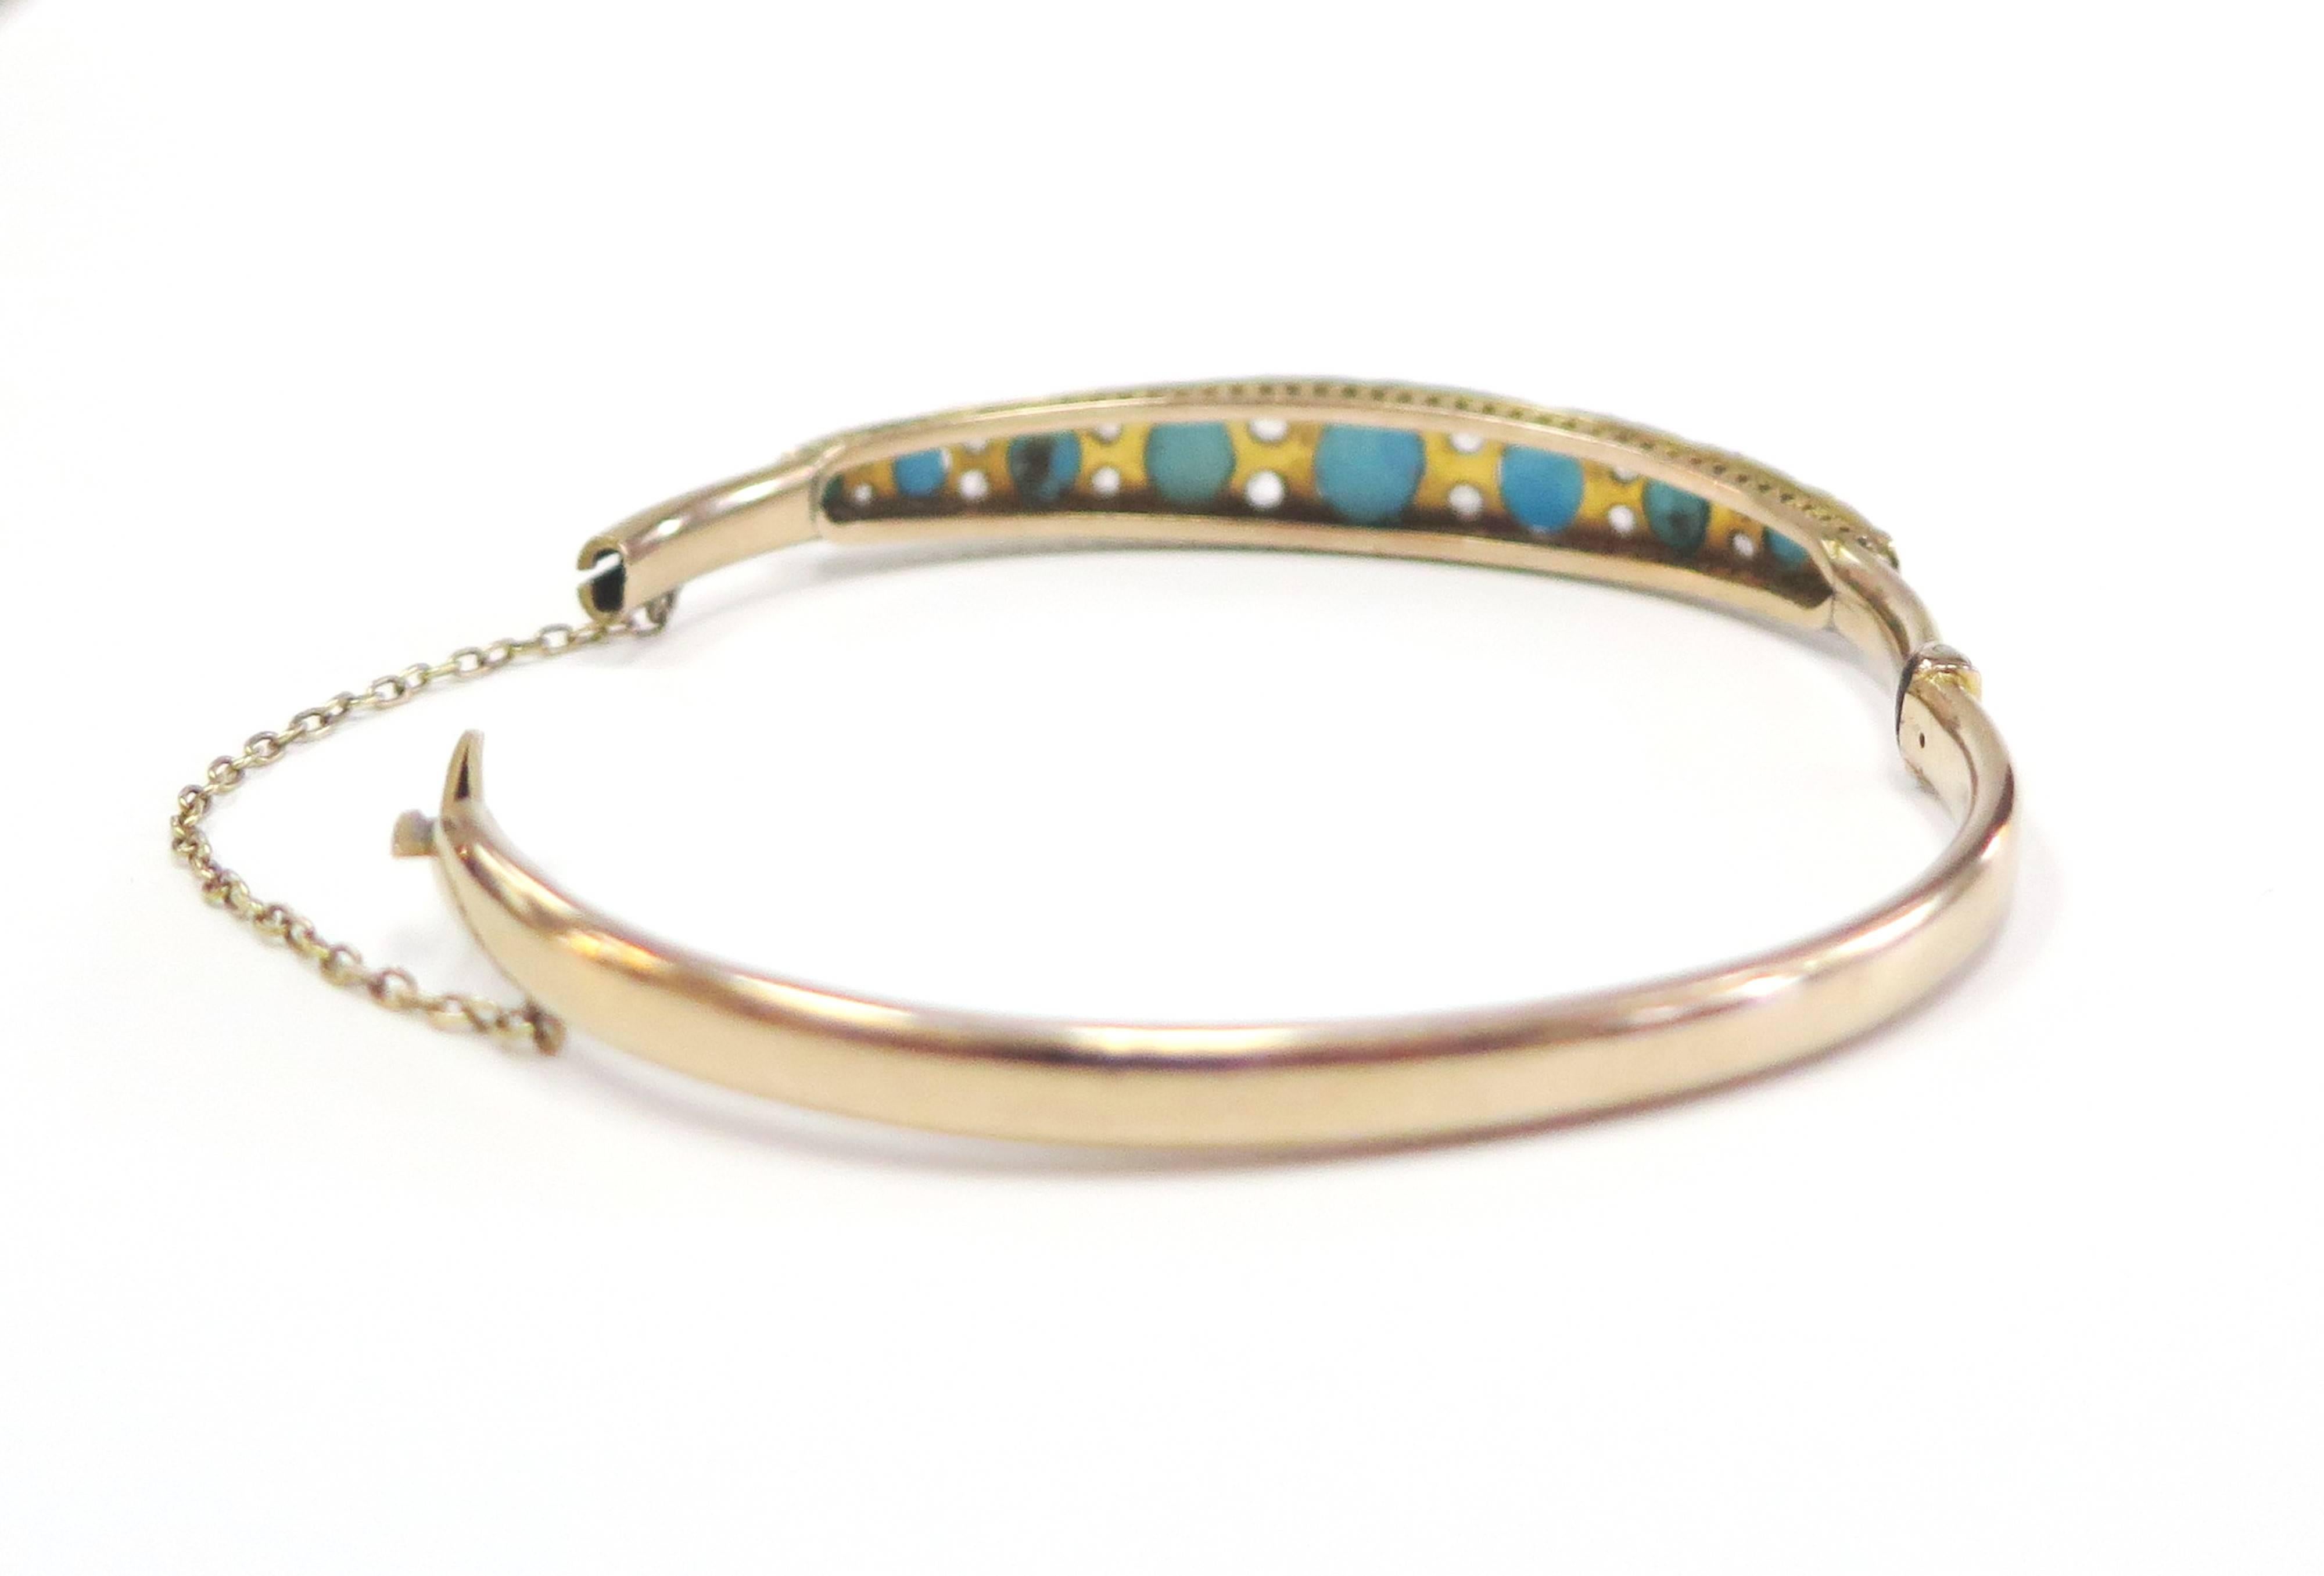 Nine deep rich graduated turquoises, separated by a pair of glittering rose cut diamonds, in this rare, wonderful and very wearable bangle, handcrafted in 14 Karat yellow gold. A colorful and timeless antique Victorian bangle bracelet from the